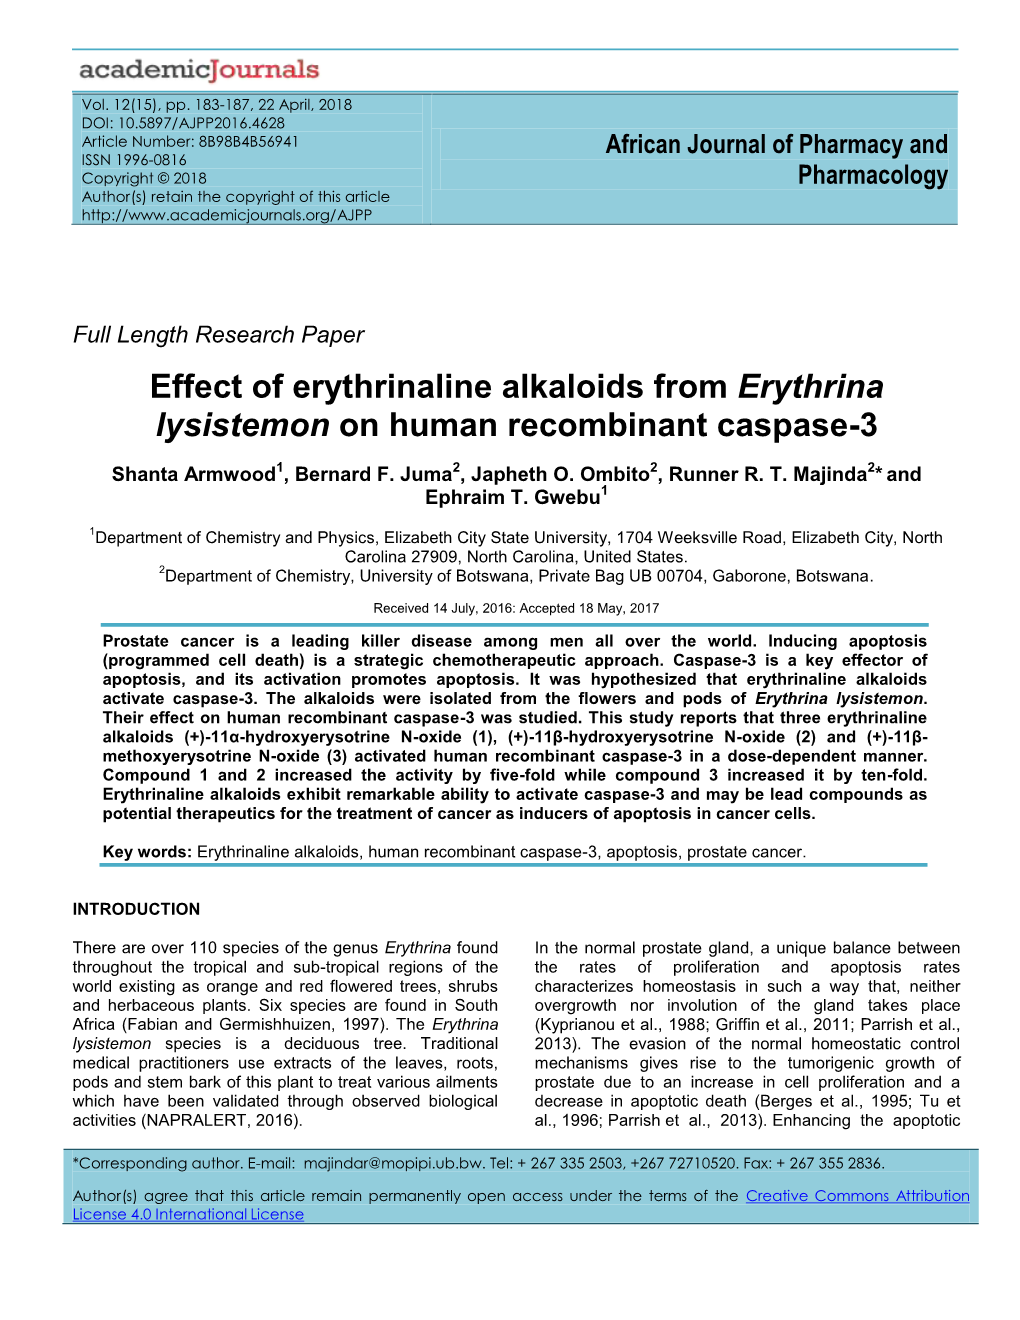 Effect of Erythrinaline Alkaloids from Erythrina Lysistemon on Human Recombinant Caspase-3